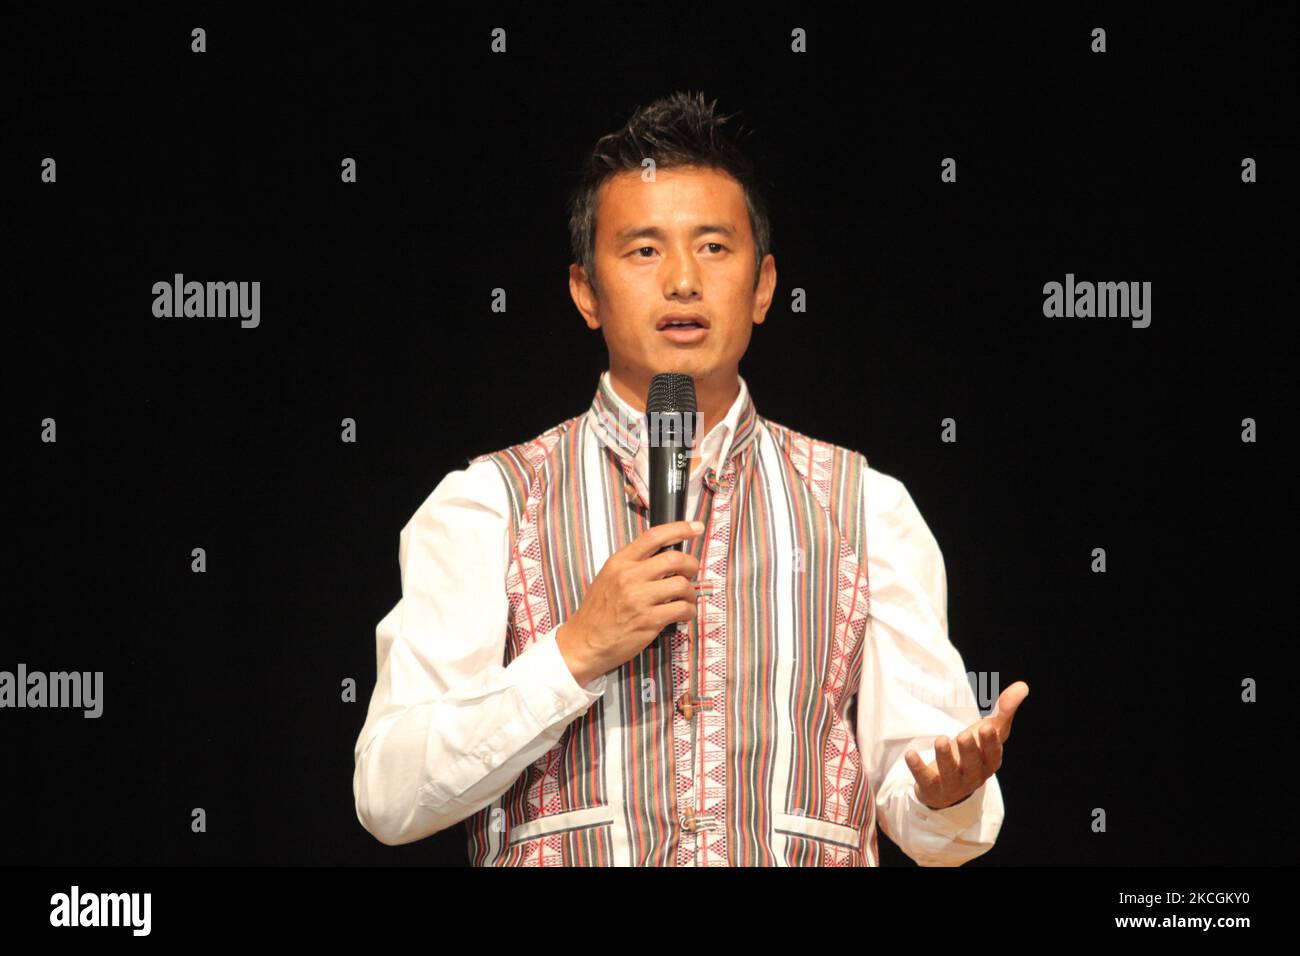 Baichung Bhutia the former captain of the Indian football (soccer) team speaks during the first ever Himalayan Ethnic Lepcha Fashion Show held in Gangtok, Sikkim, India, on November 10, 2012. Bhutia is considered to be the torchbearer of Indian football in the international arena, and is nicknamed the Sikkimese Sniper because of his shooting skills in football. Bhutia has had four spells at I-League football team East Bengal Club, the club where he started his career. When he signed up to play for the English club Bury in 1999, he became the first Indian footballer to play professional footbal Stock Photo